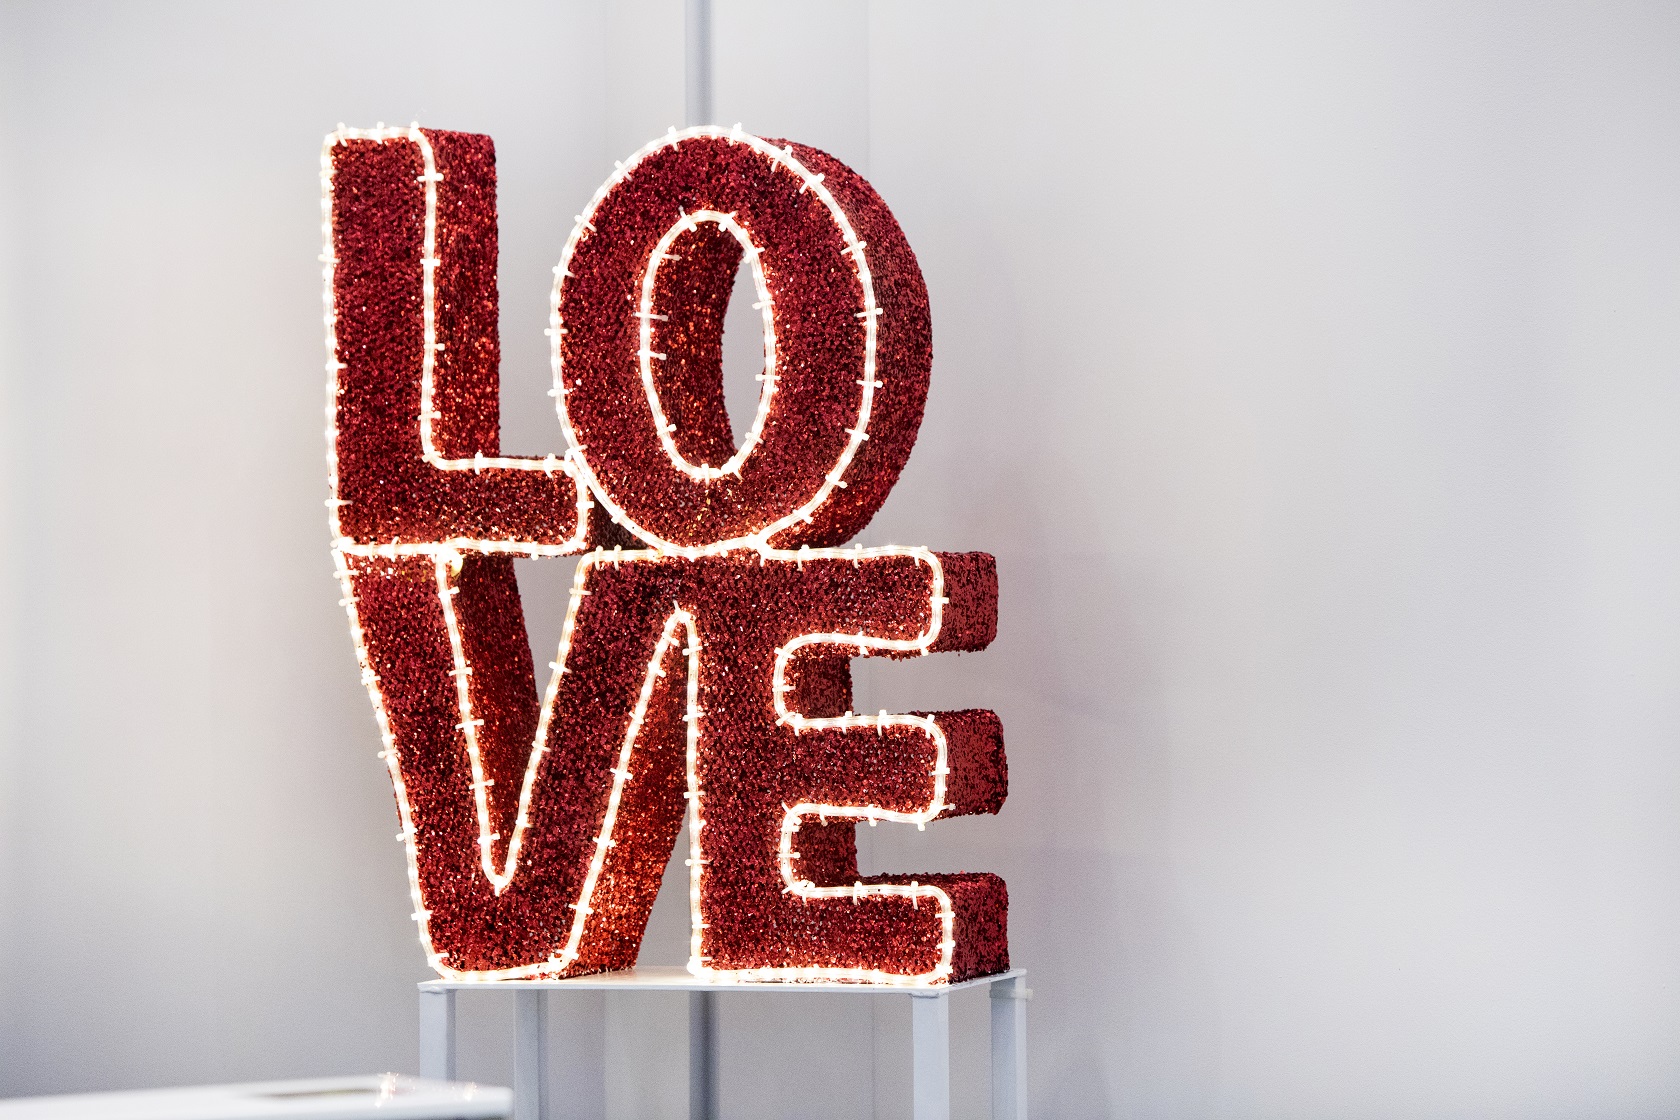 Creative sculptures and 3D letters come together to light up this contemporary lobby through the holiday season